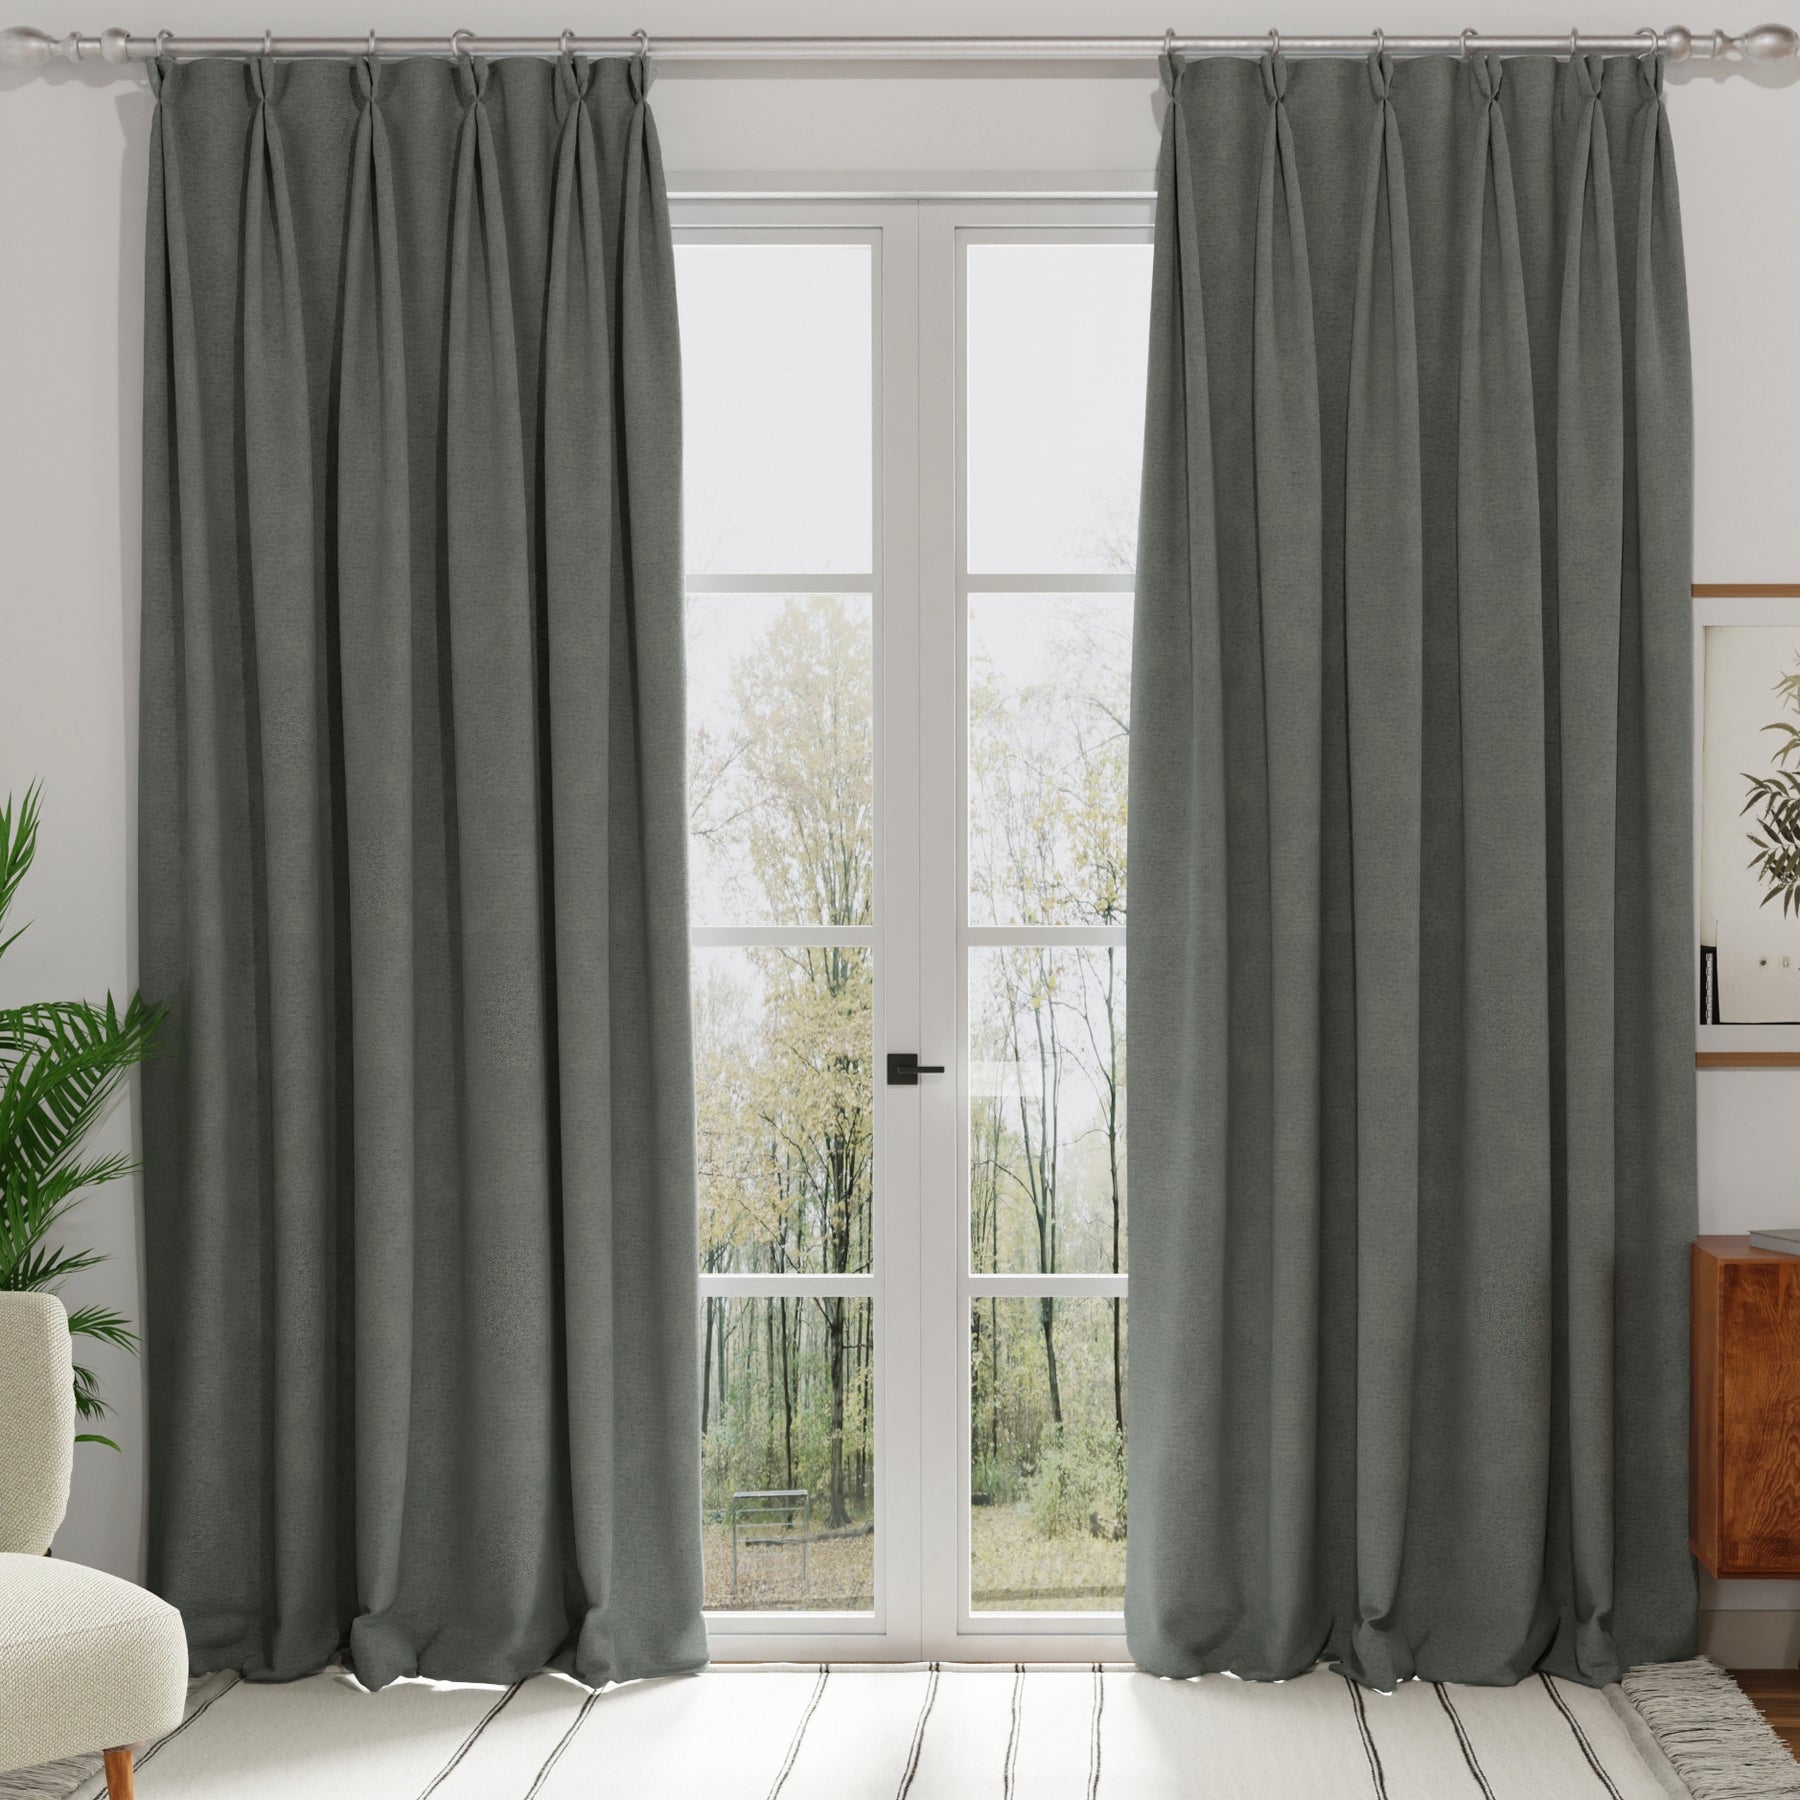 Modena Recycled Made To Measure Curtains Denim